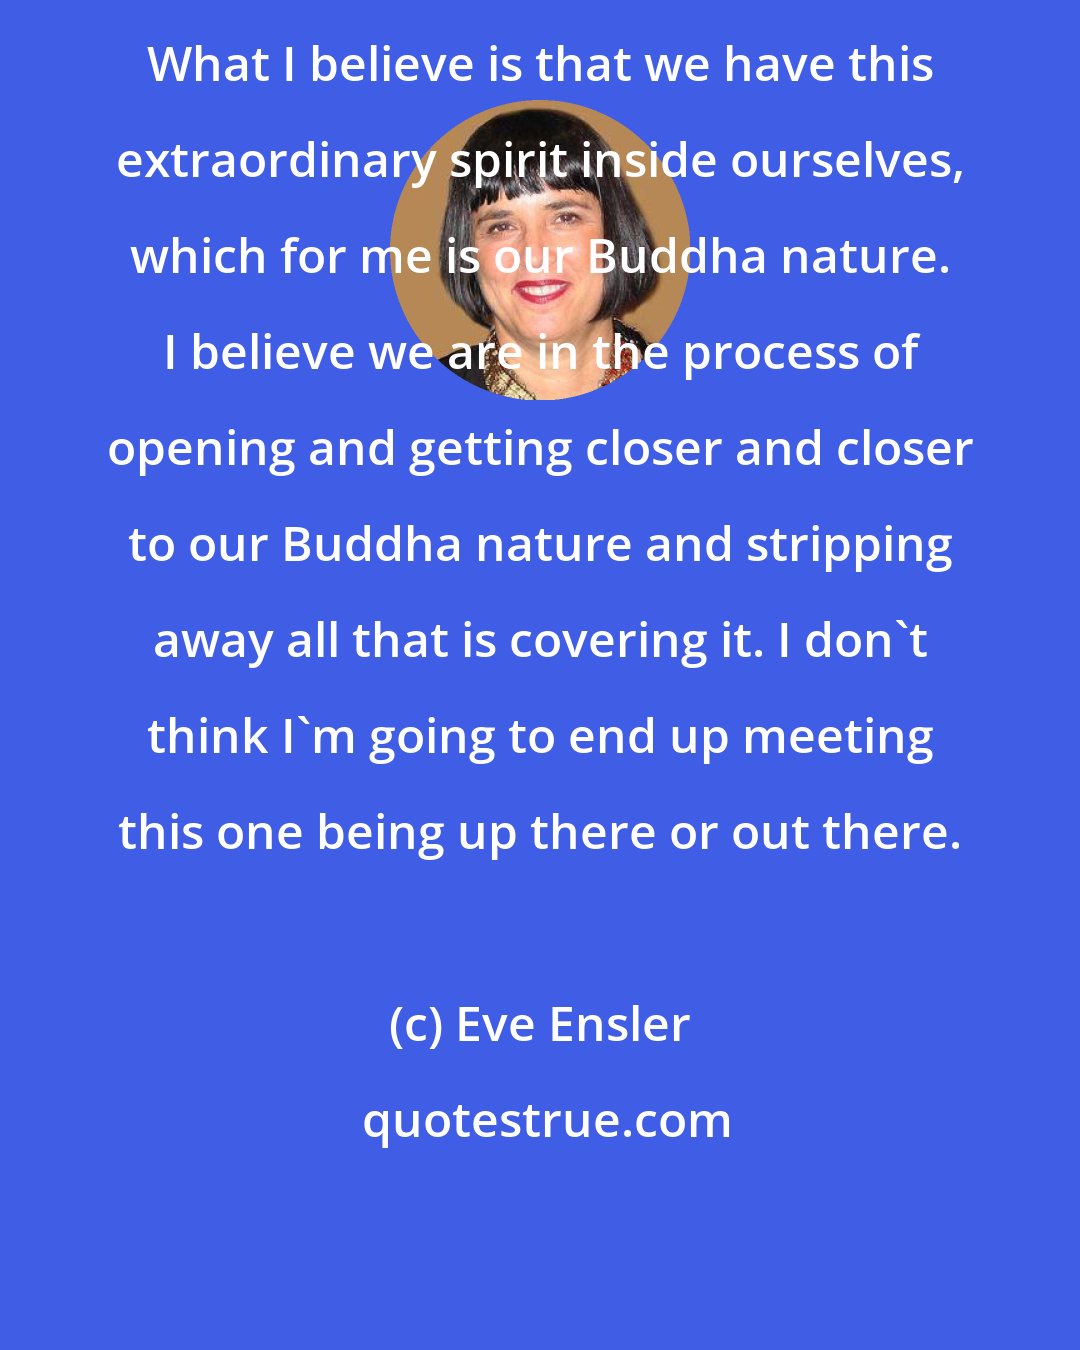 Eve Ensler: What I believe is that we have this extraordinary spirit inside ourselves, which for me is our Buddha nature. I believe we are in the process of opening and getting closer and closer to our Buddha nature and stripping away all that is covering it. I don't think I'm going to end up meeting this one being up there or out there.